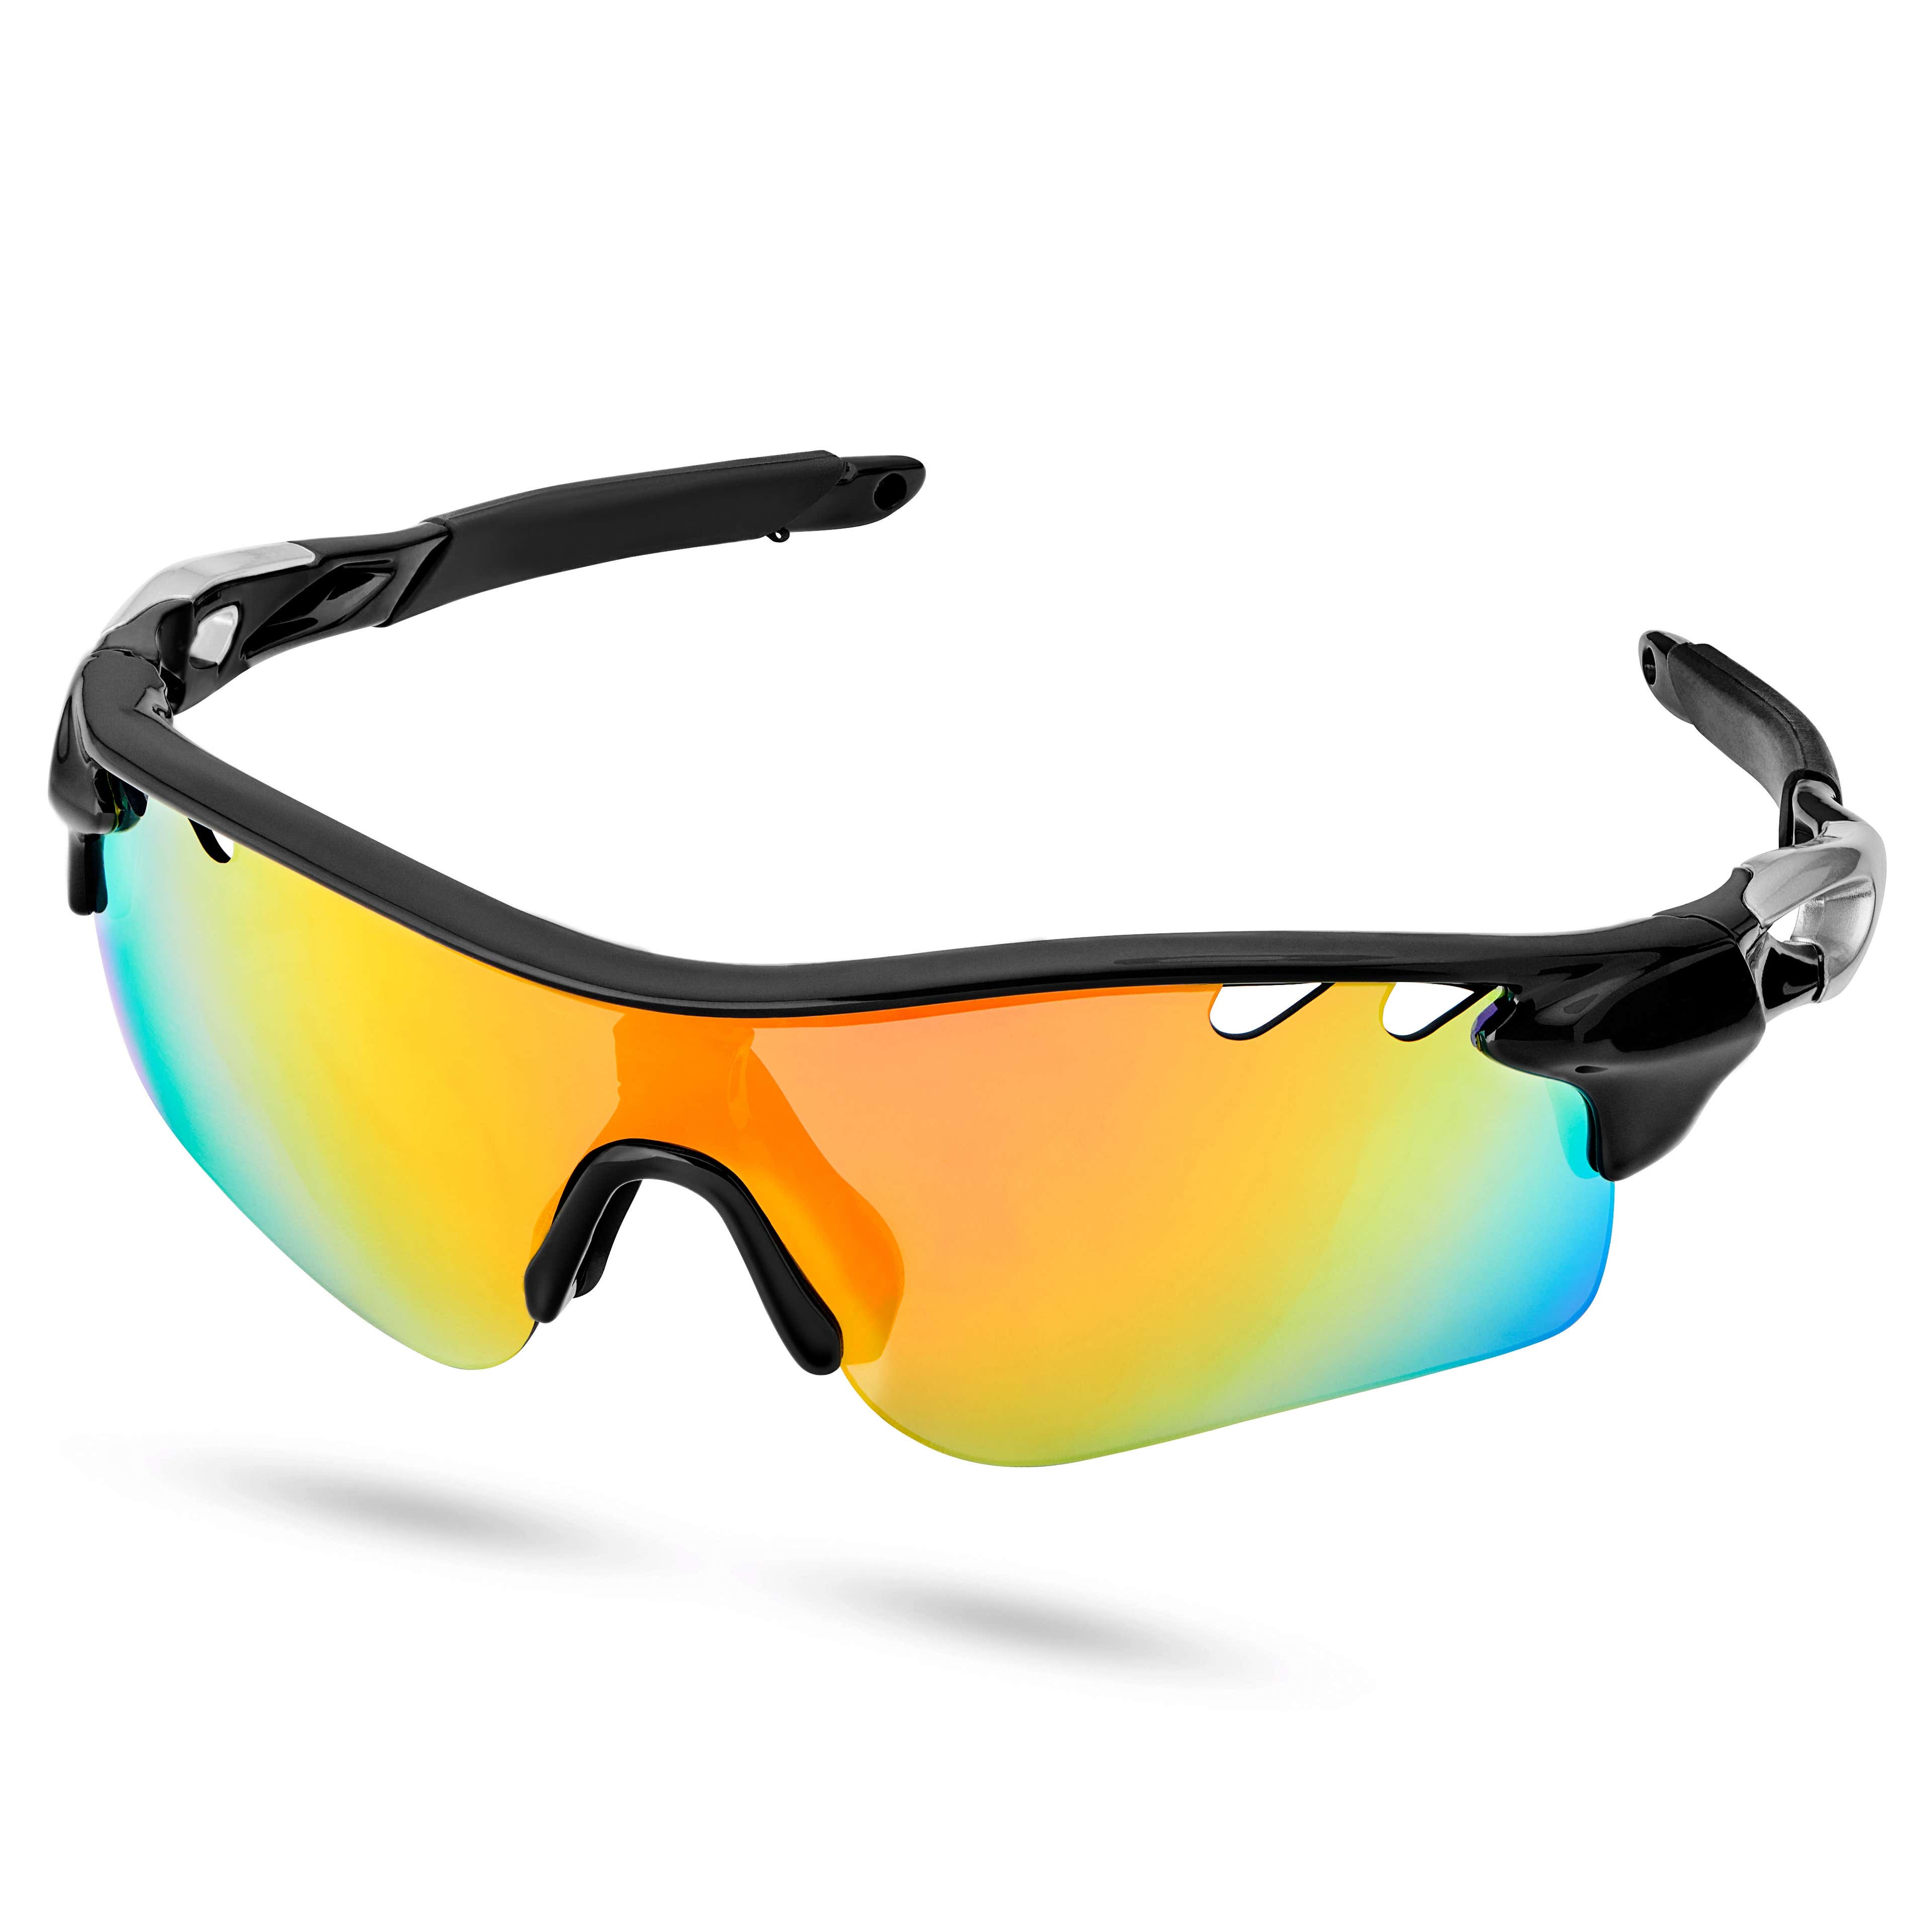 Black and Gray Interchangeable Lens Sports Sunglasses